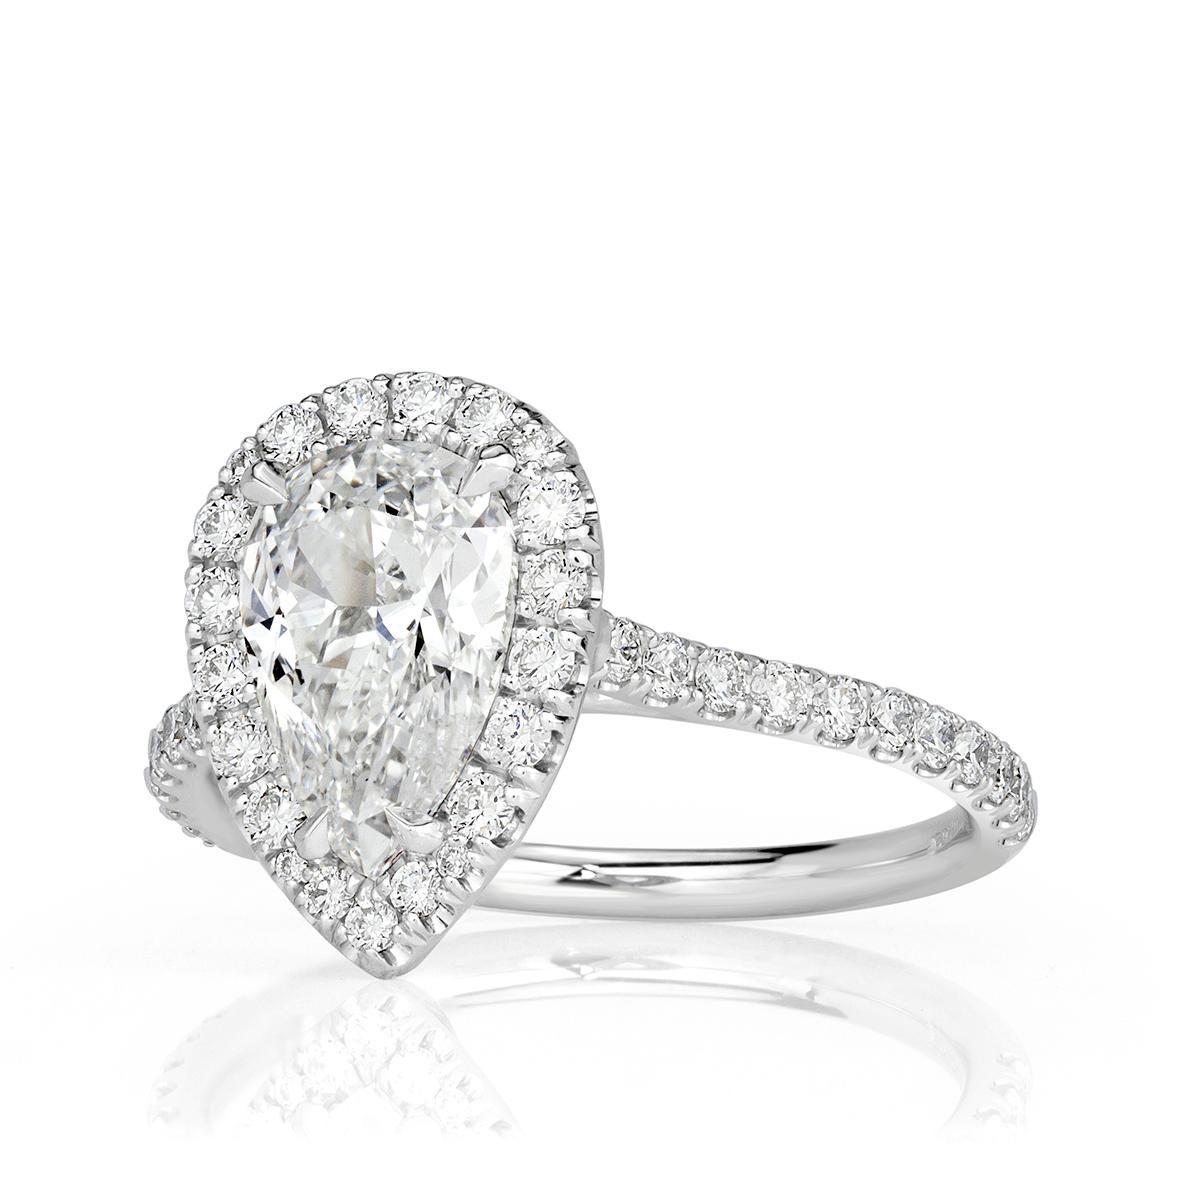 Created in platinum, this mesmerizing diamond engagement ring showcases a 1.52ct pear shaped center diamond, GIA certified at E-SI1. It is accented by a shimmering halo of round brilliant cut diamonds as well as one row of sparkling diamonds micro